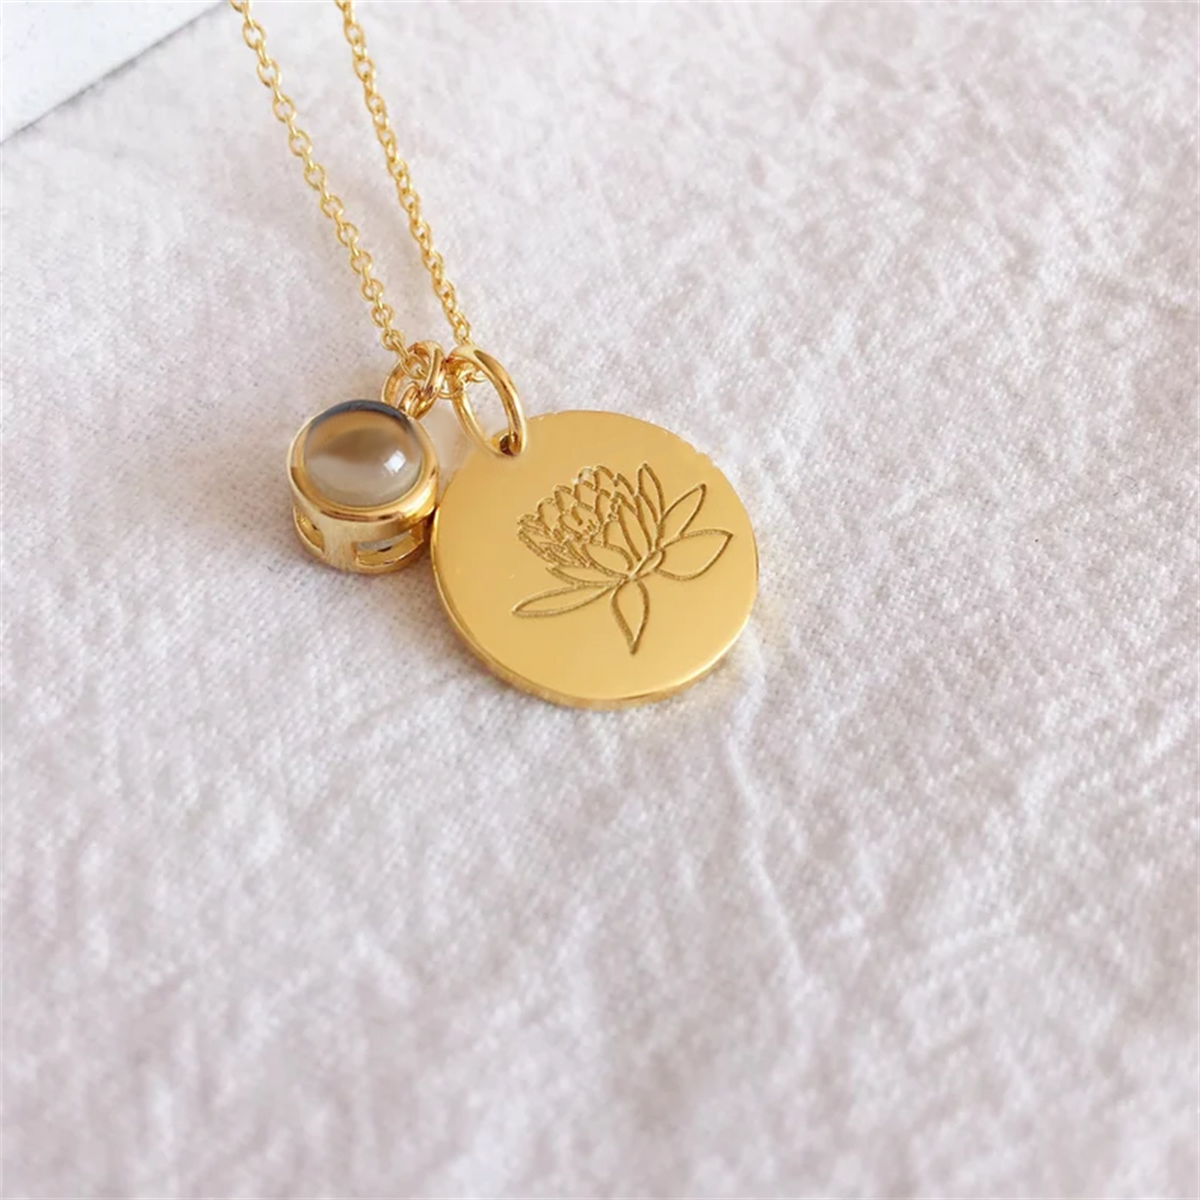 Personalized Projection and Pendant Necklace